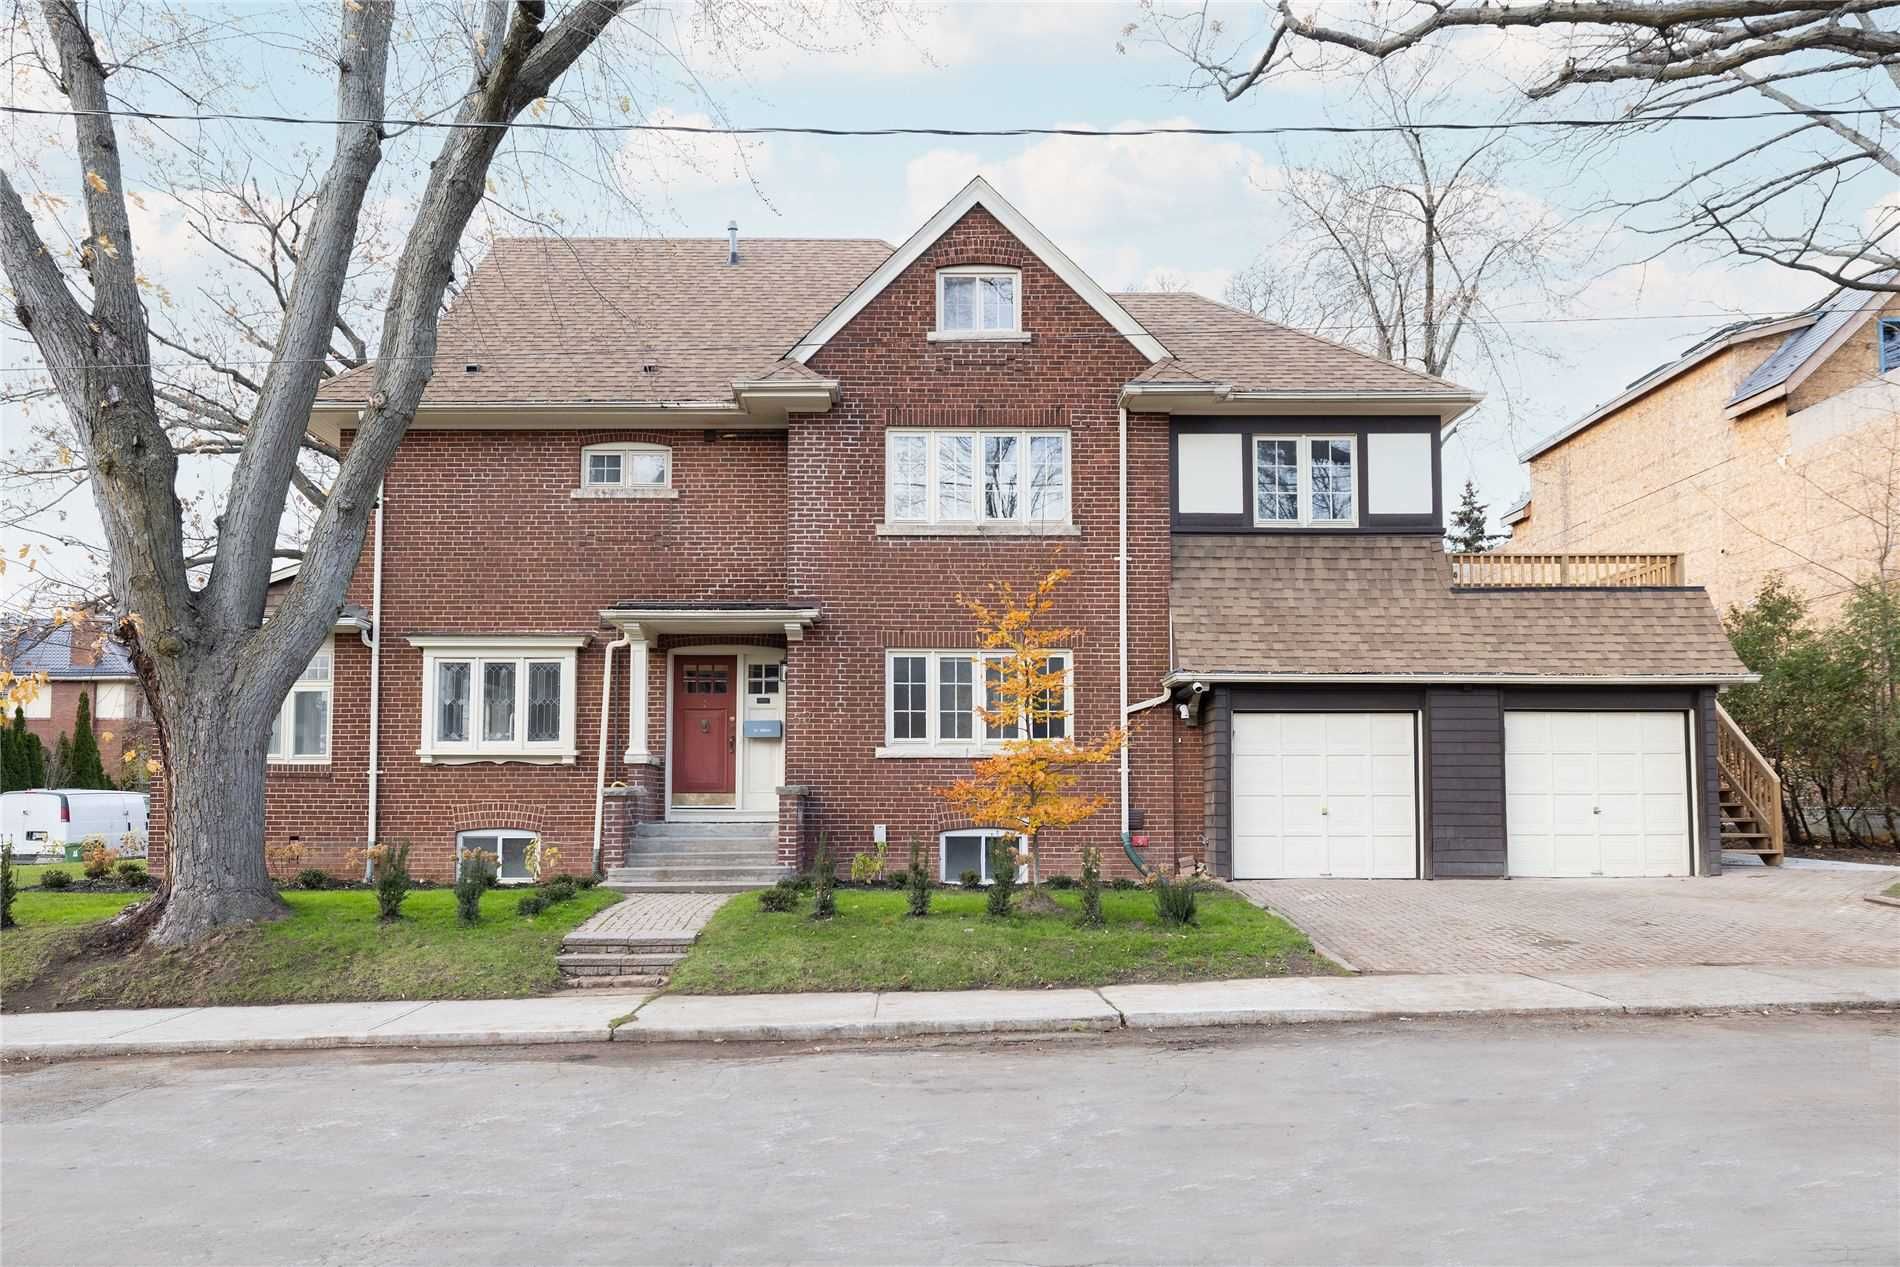 I have sold a property at C 53 Clifton RD in Toronto
